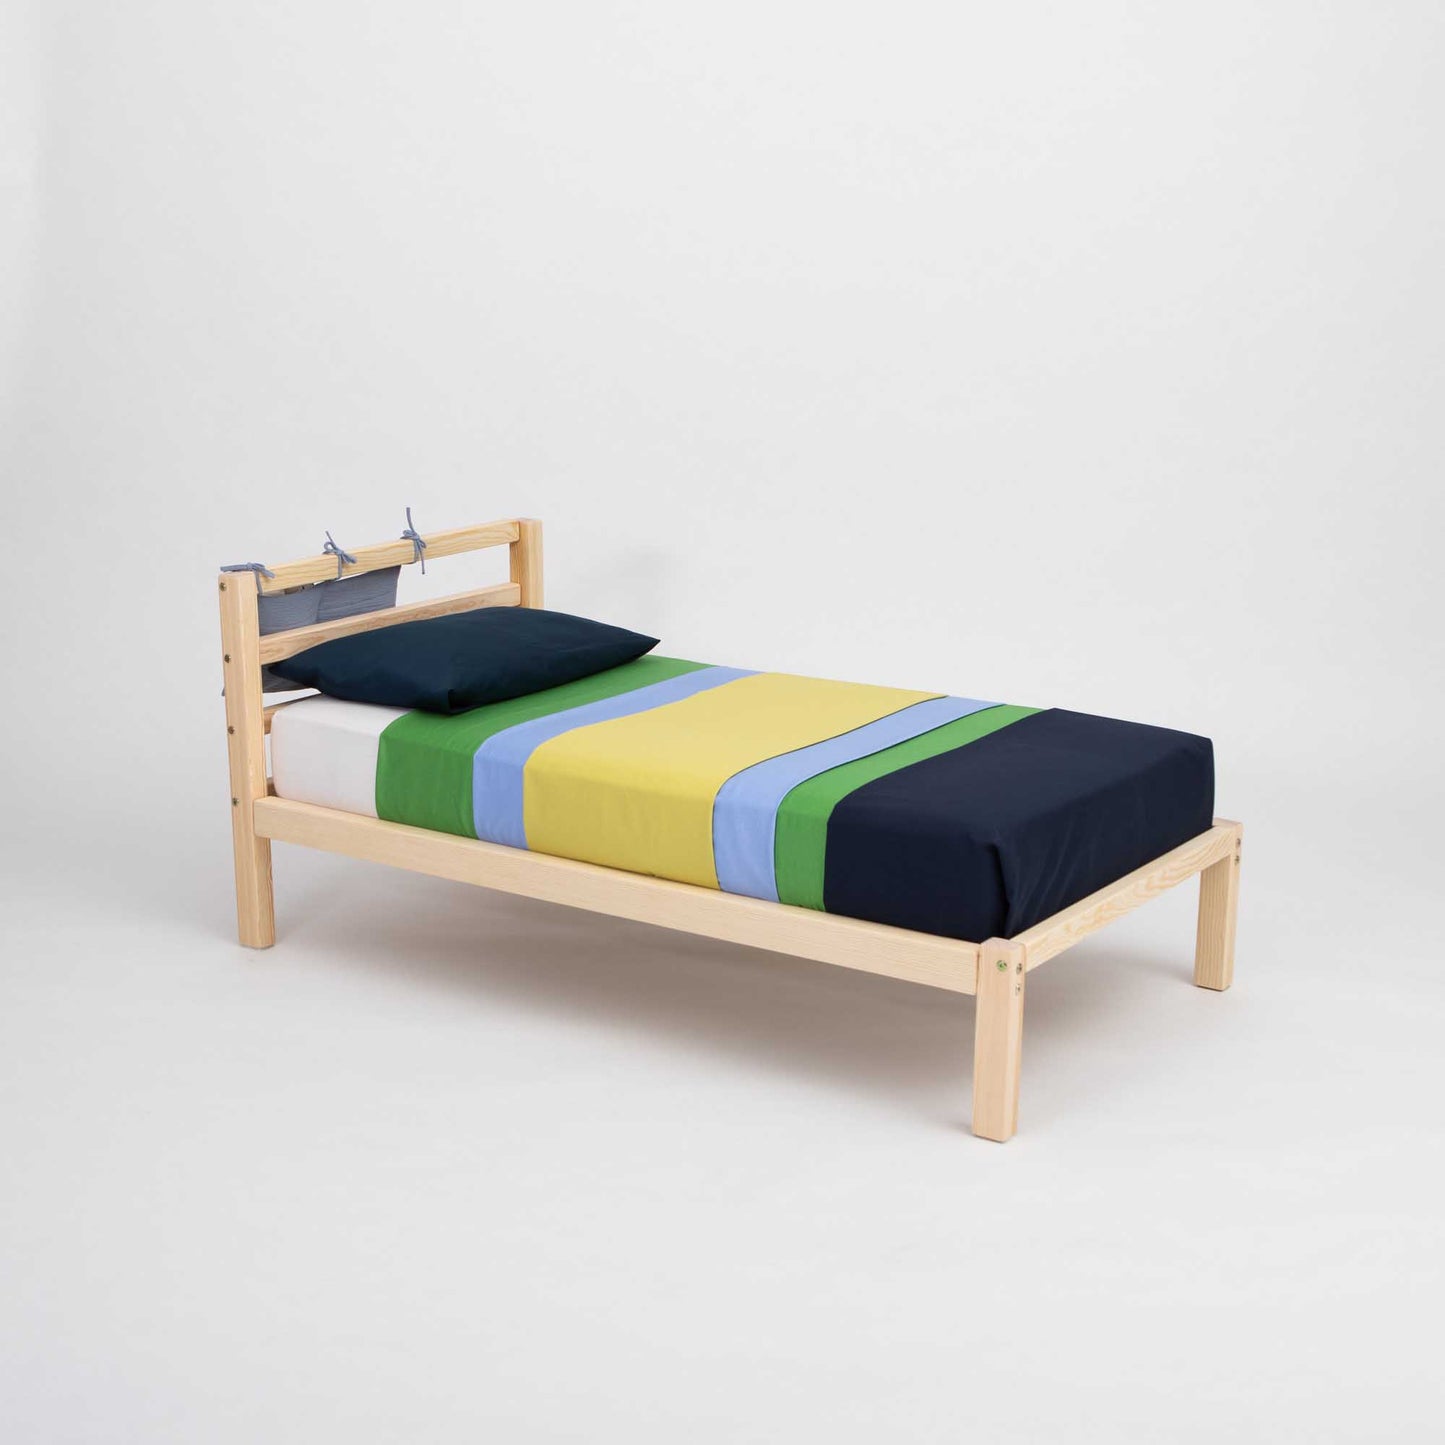 A Kids' bed on legs with a horizontal rail headboard from Sweet Home From Wood, adorned with a colorful striped sheet.